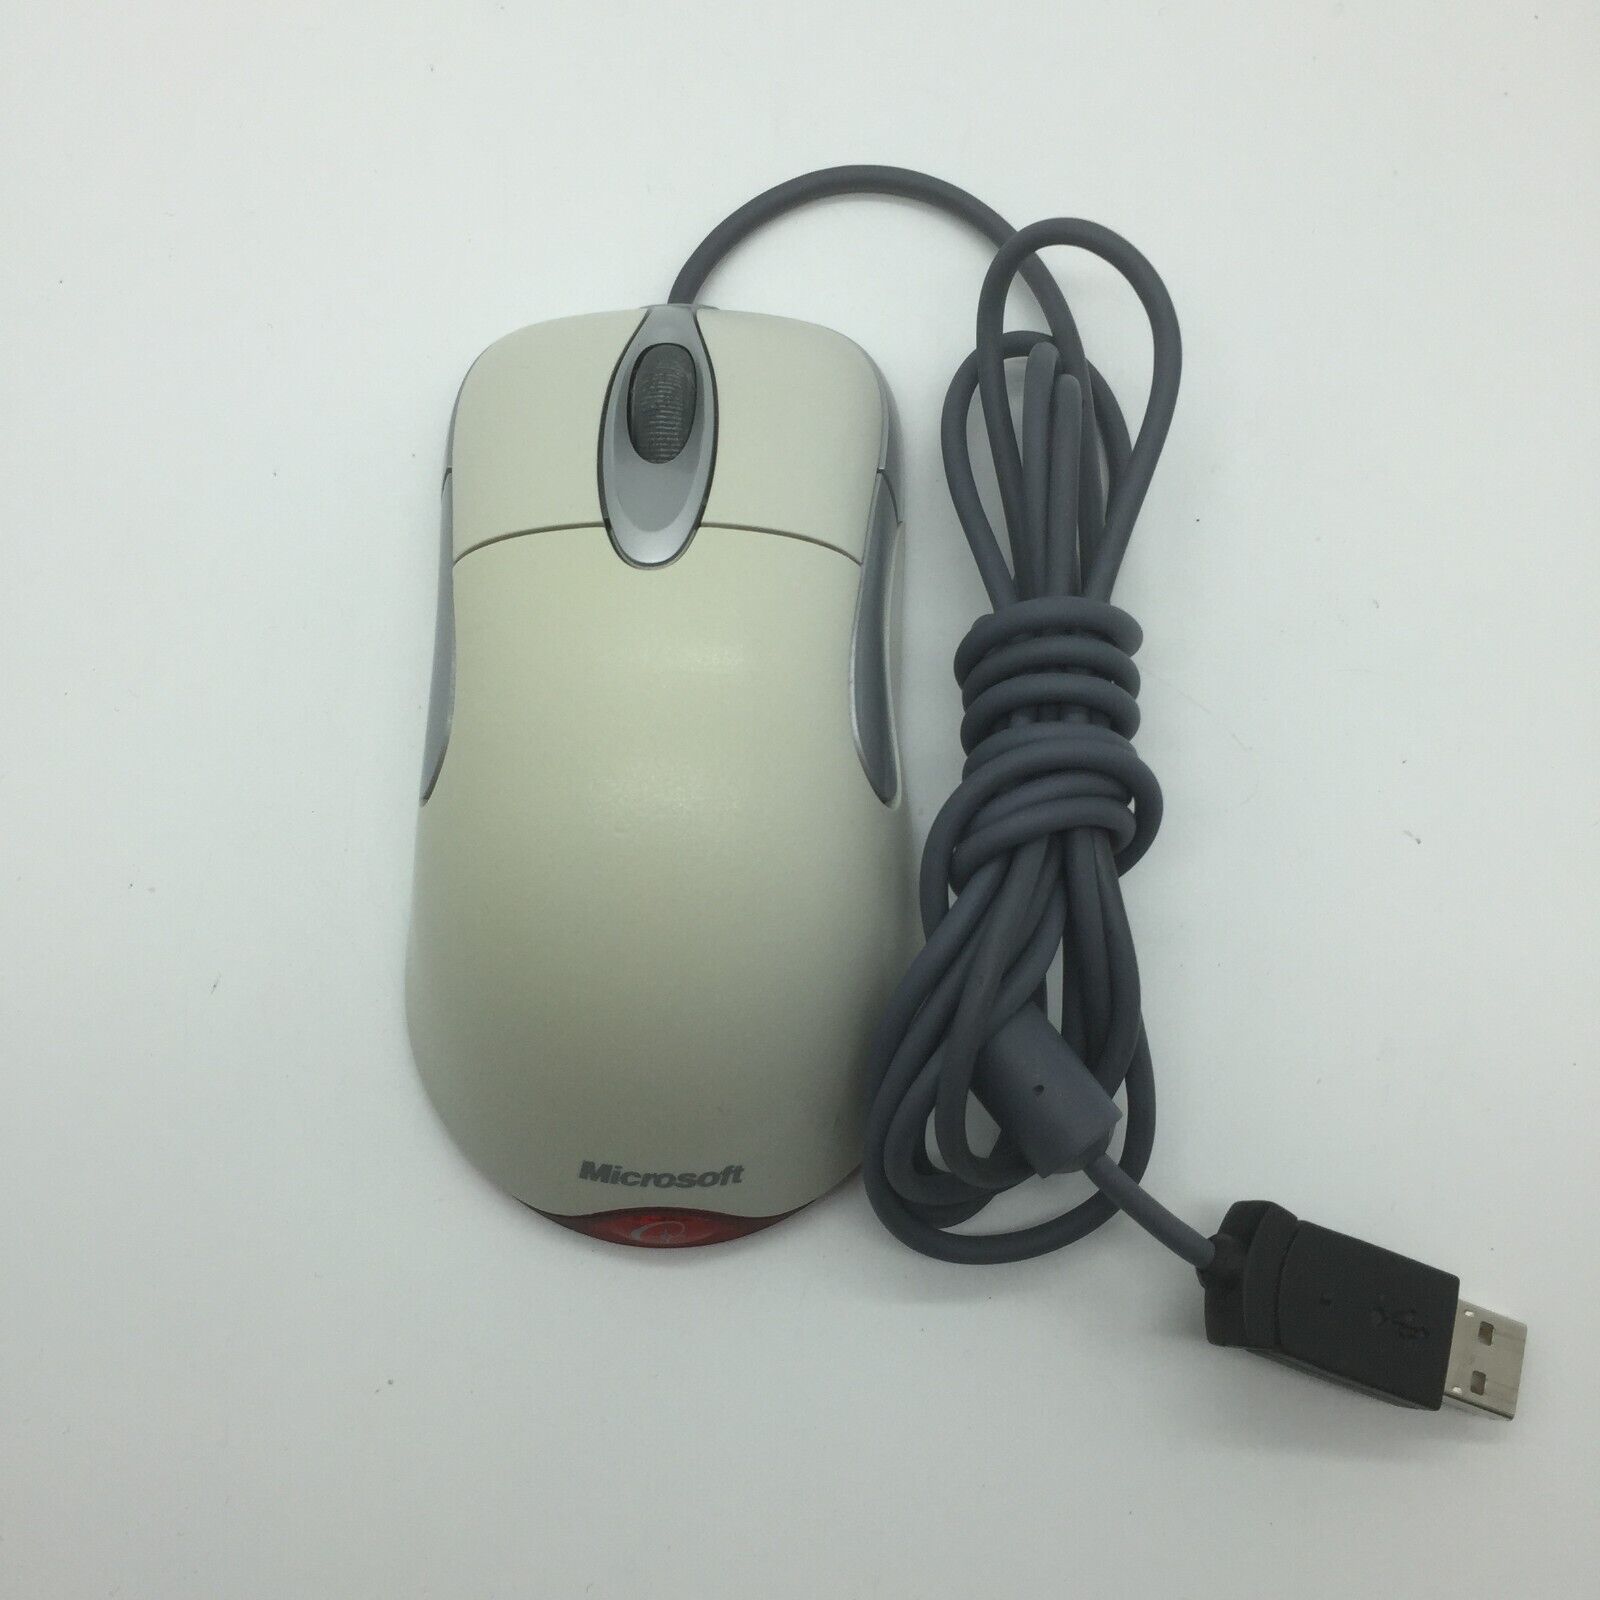 Vintage Microsoft intellimouse Optical USB Wheel Mouse 1.1/1.1a Tested Free S/H